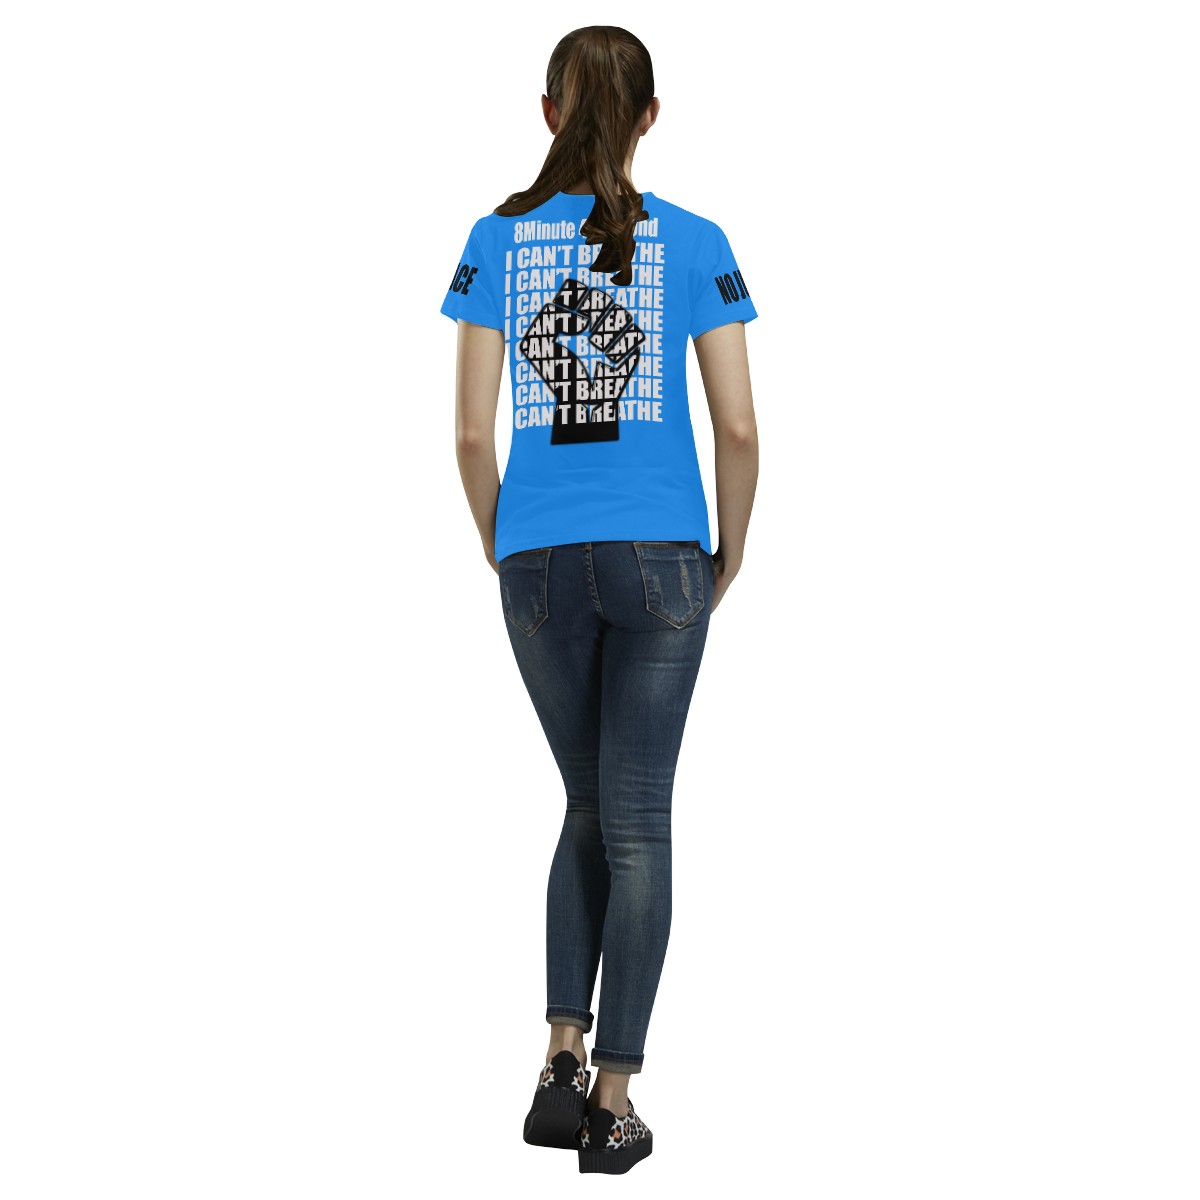 TIME20-DESIGN-GEORGE FLOYD All Over Print T-Shirt for Women (USA Size) (Model T40)